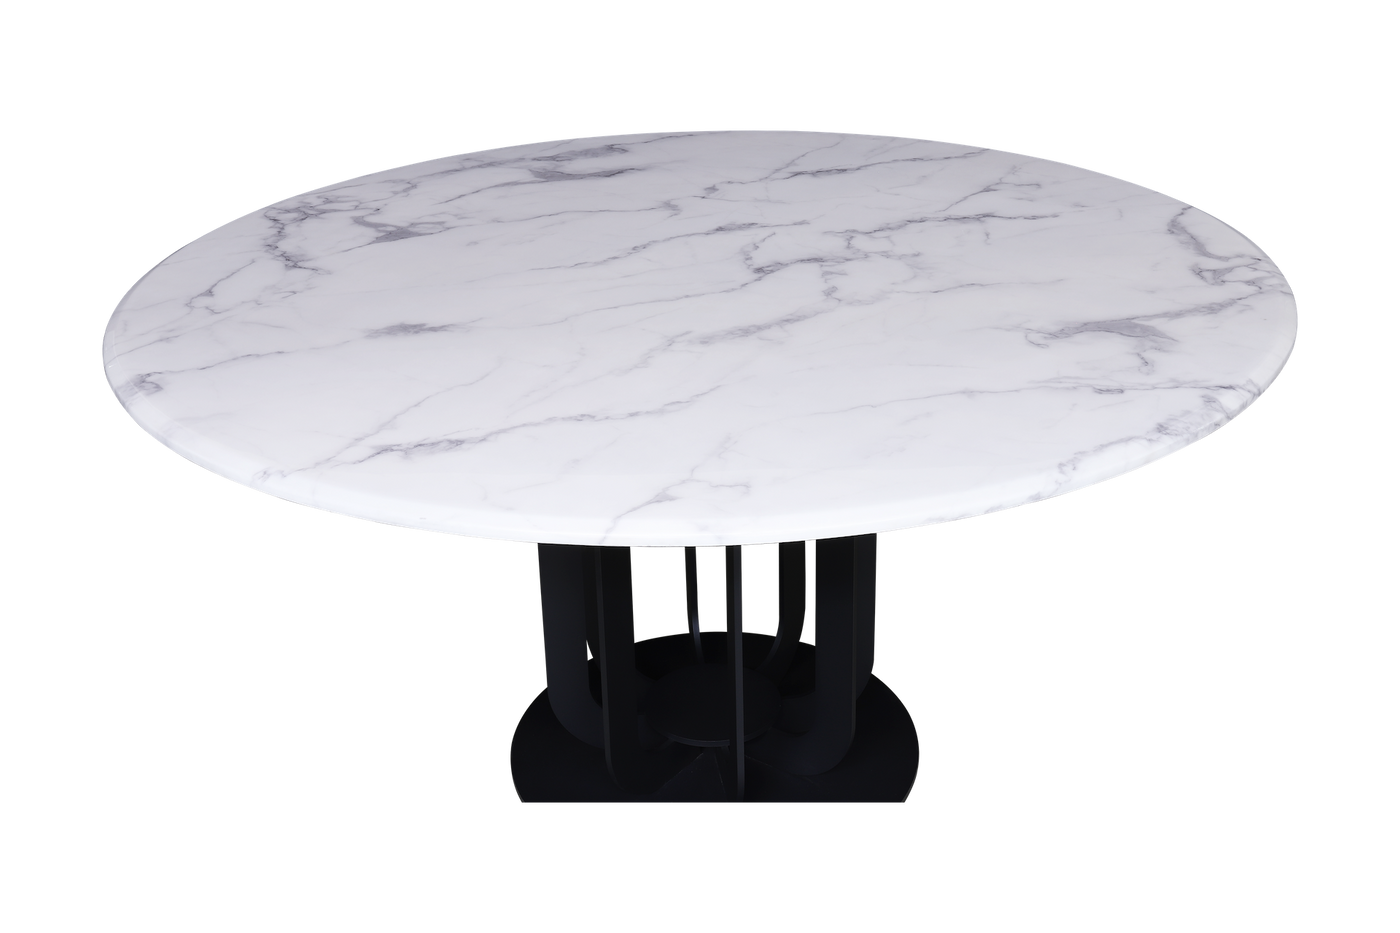 Alexandre Dining Table